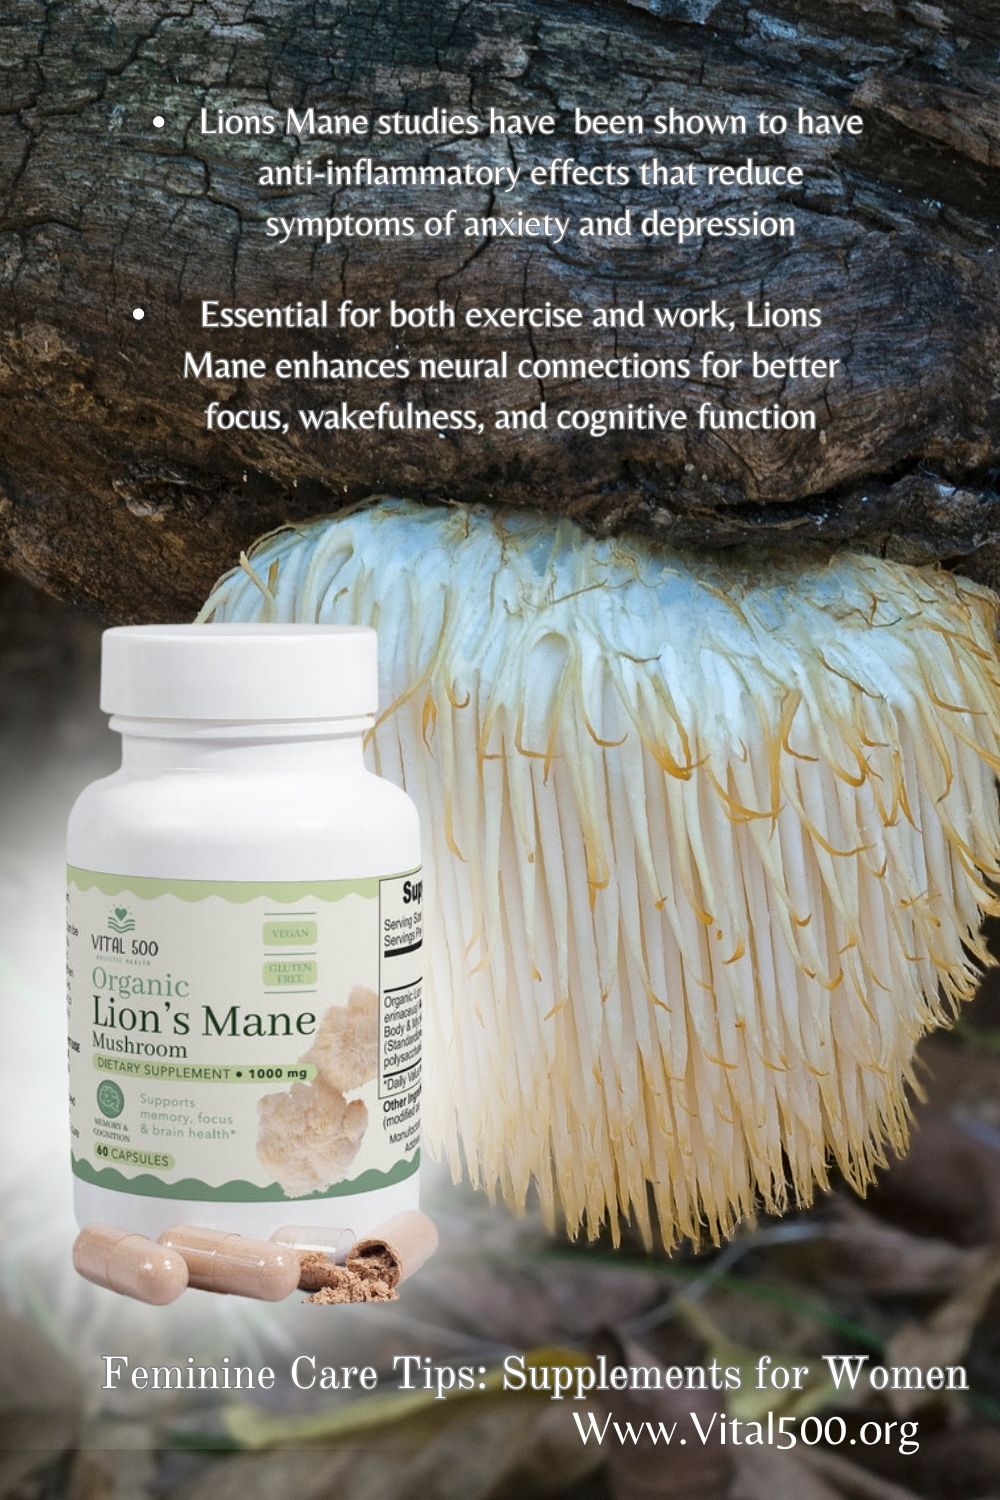 Unleash Your Inner Lioness: 7 Life-Changing Benefits of Lion’s Mane Mushrooms